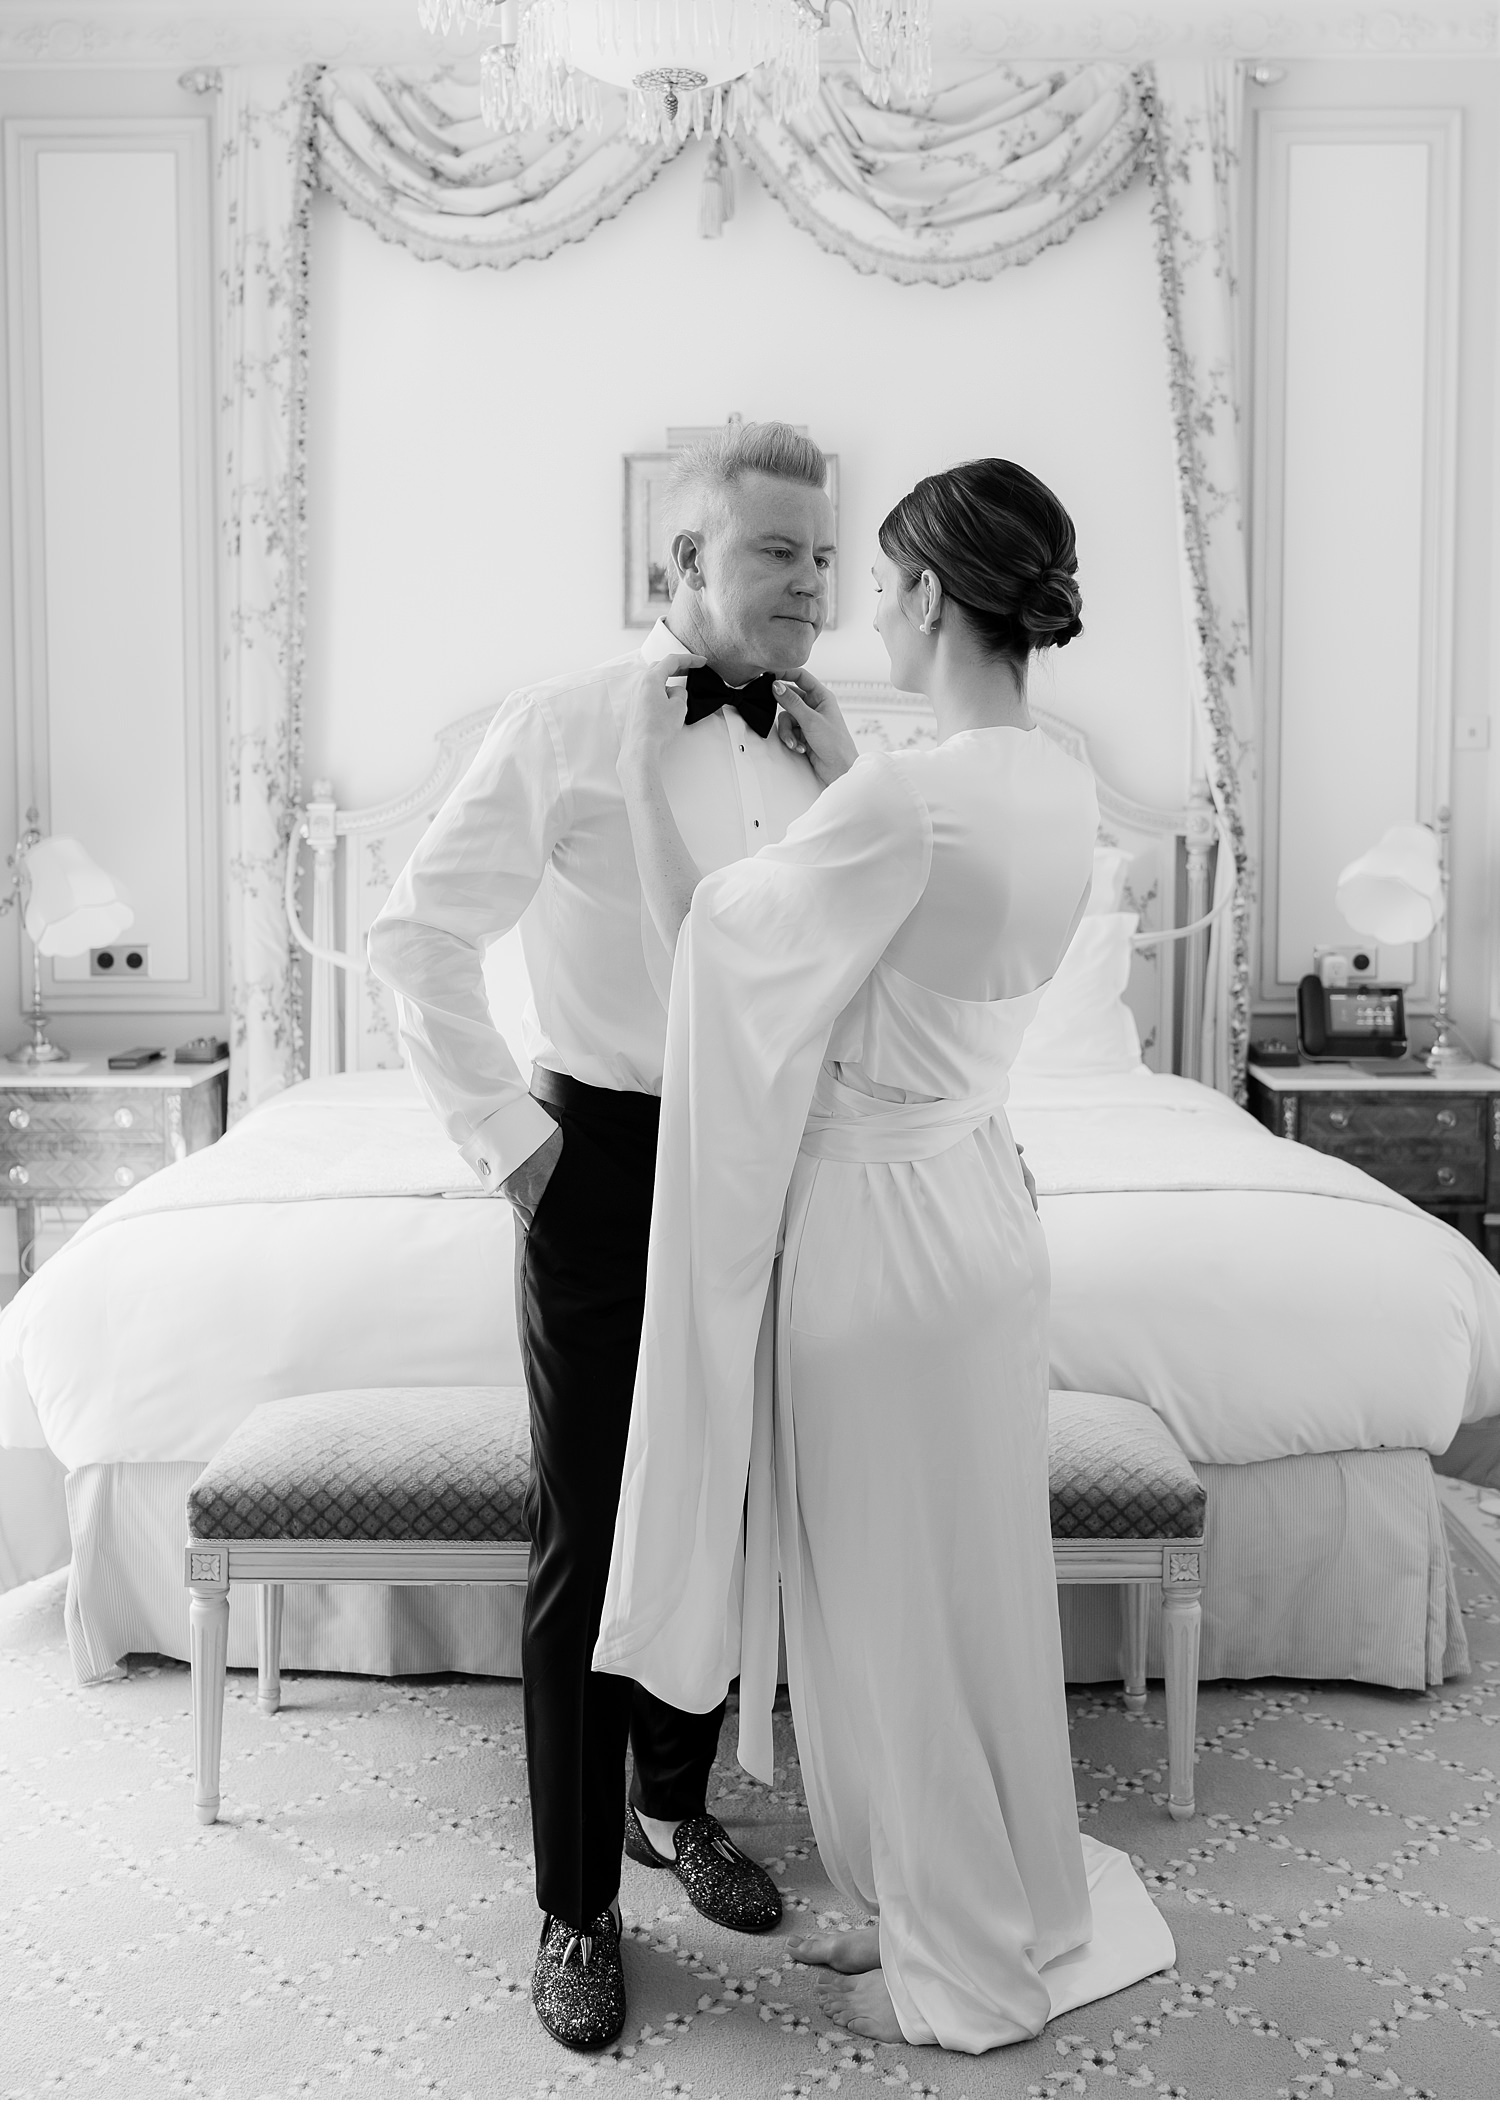 Bride and groom getting ready together for elopement, Ritz Paris, Ritz Paris elopement, getting ready portraits, elope to paris